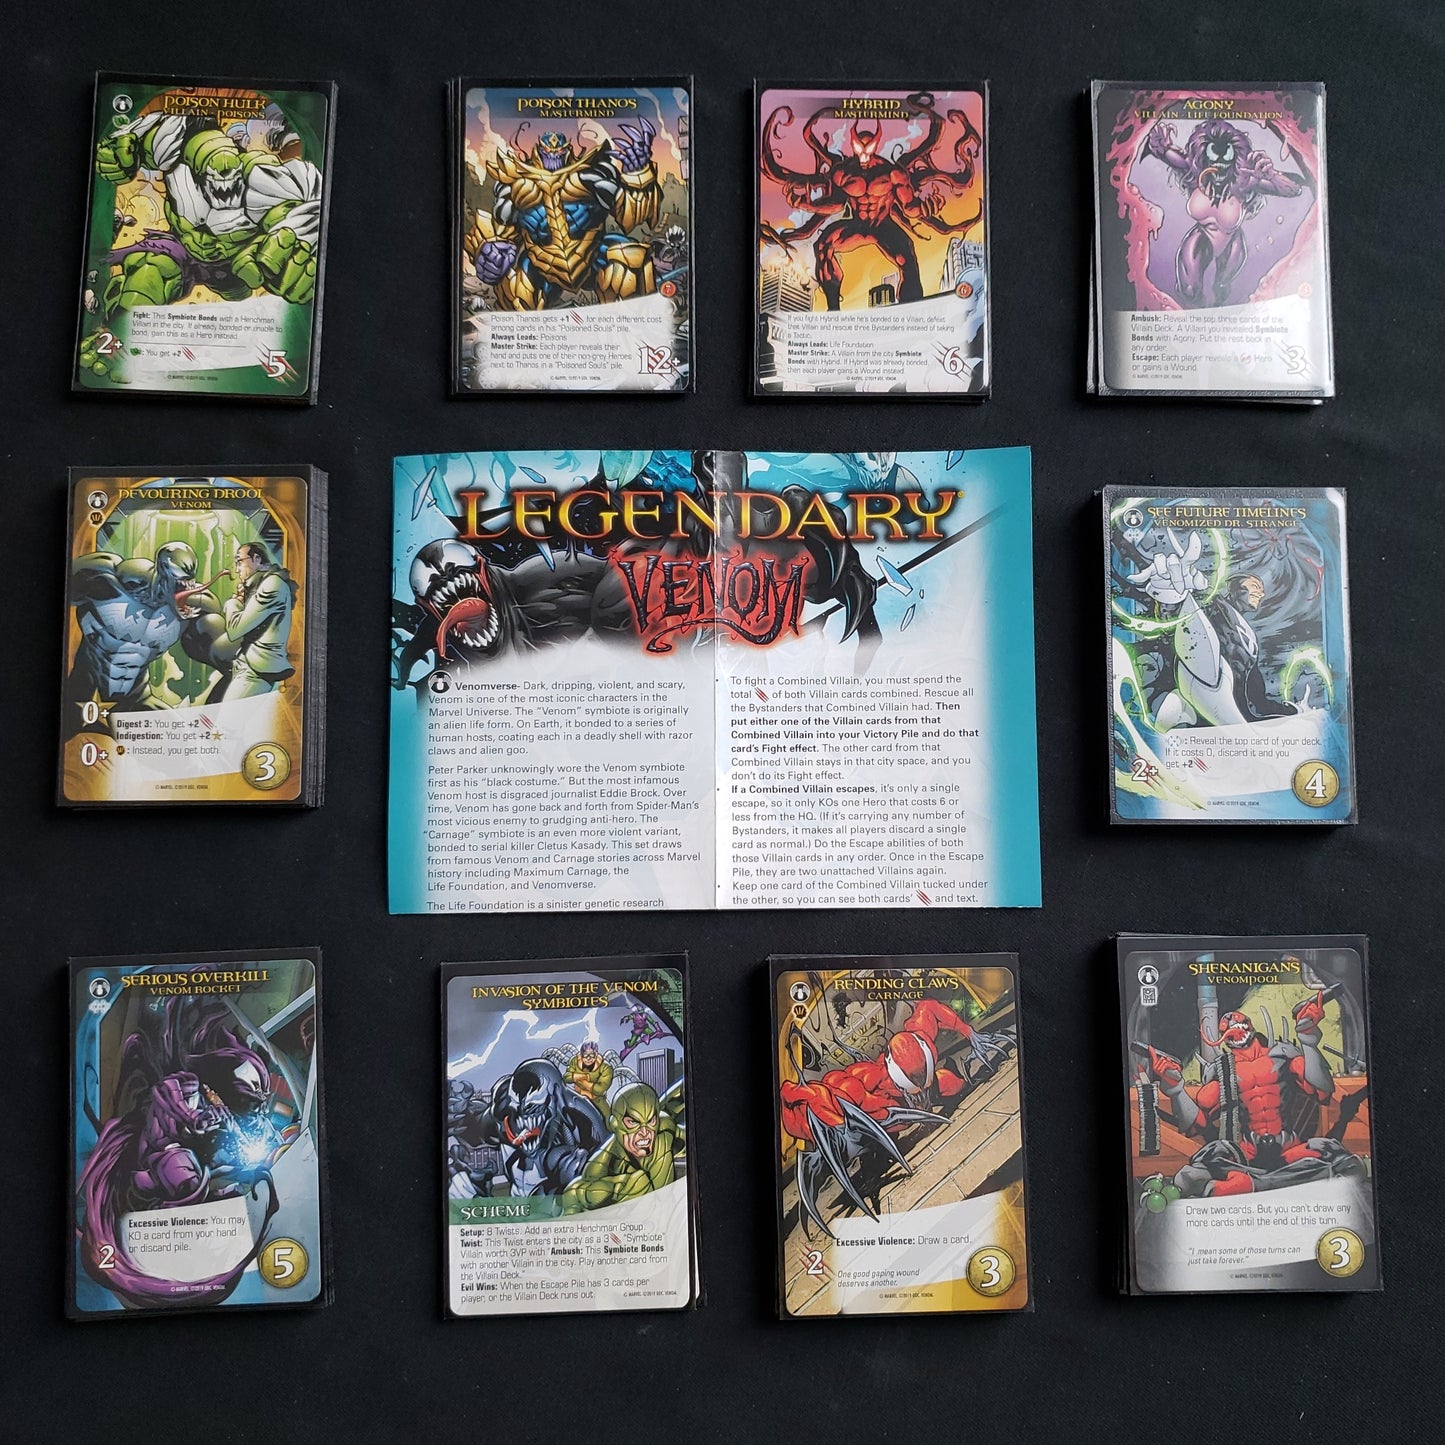 Image shows the instructions & cards arranged in stacks by card type for the Venom expansion for the board game Legendary Marvel